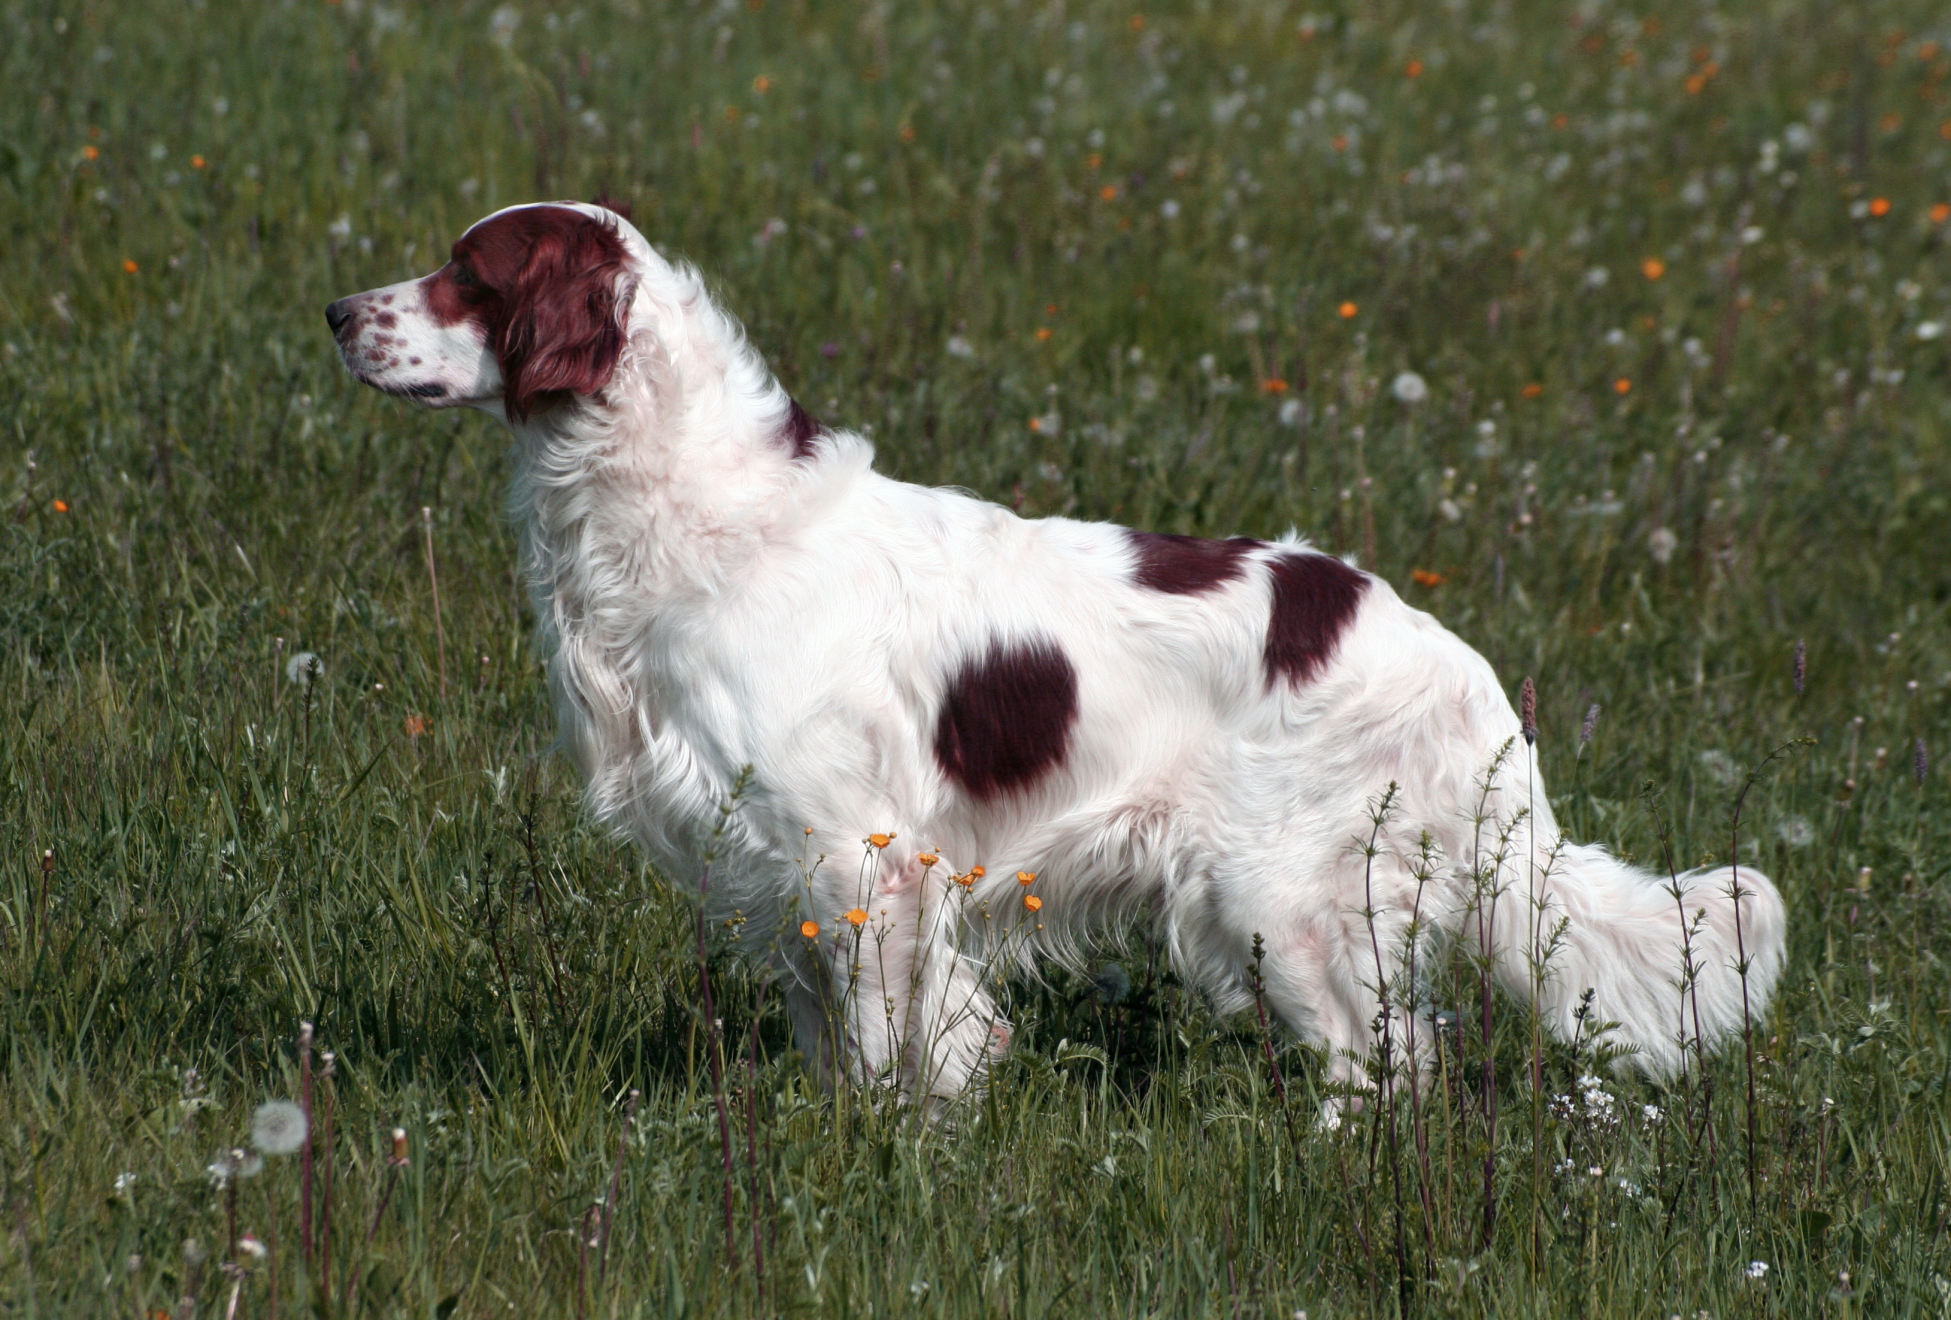 Irish Red and White Setter stood nose pointed to the left in a field